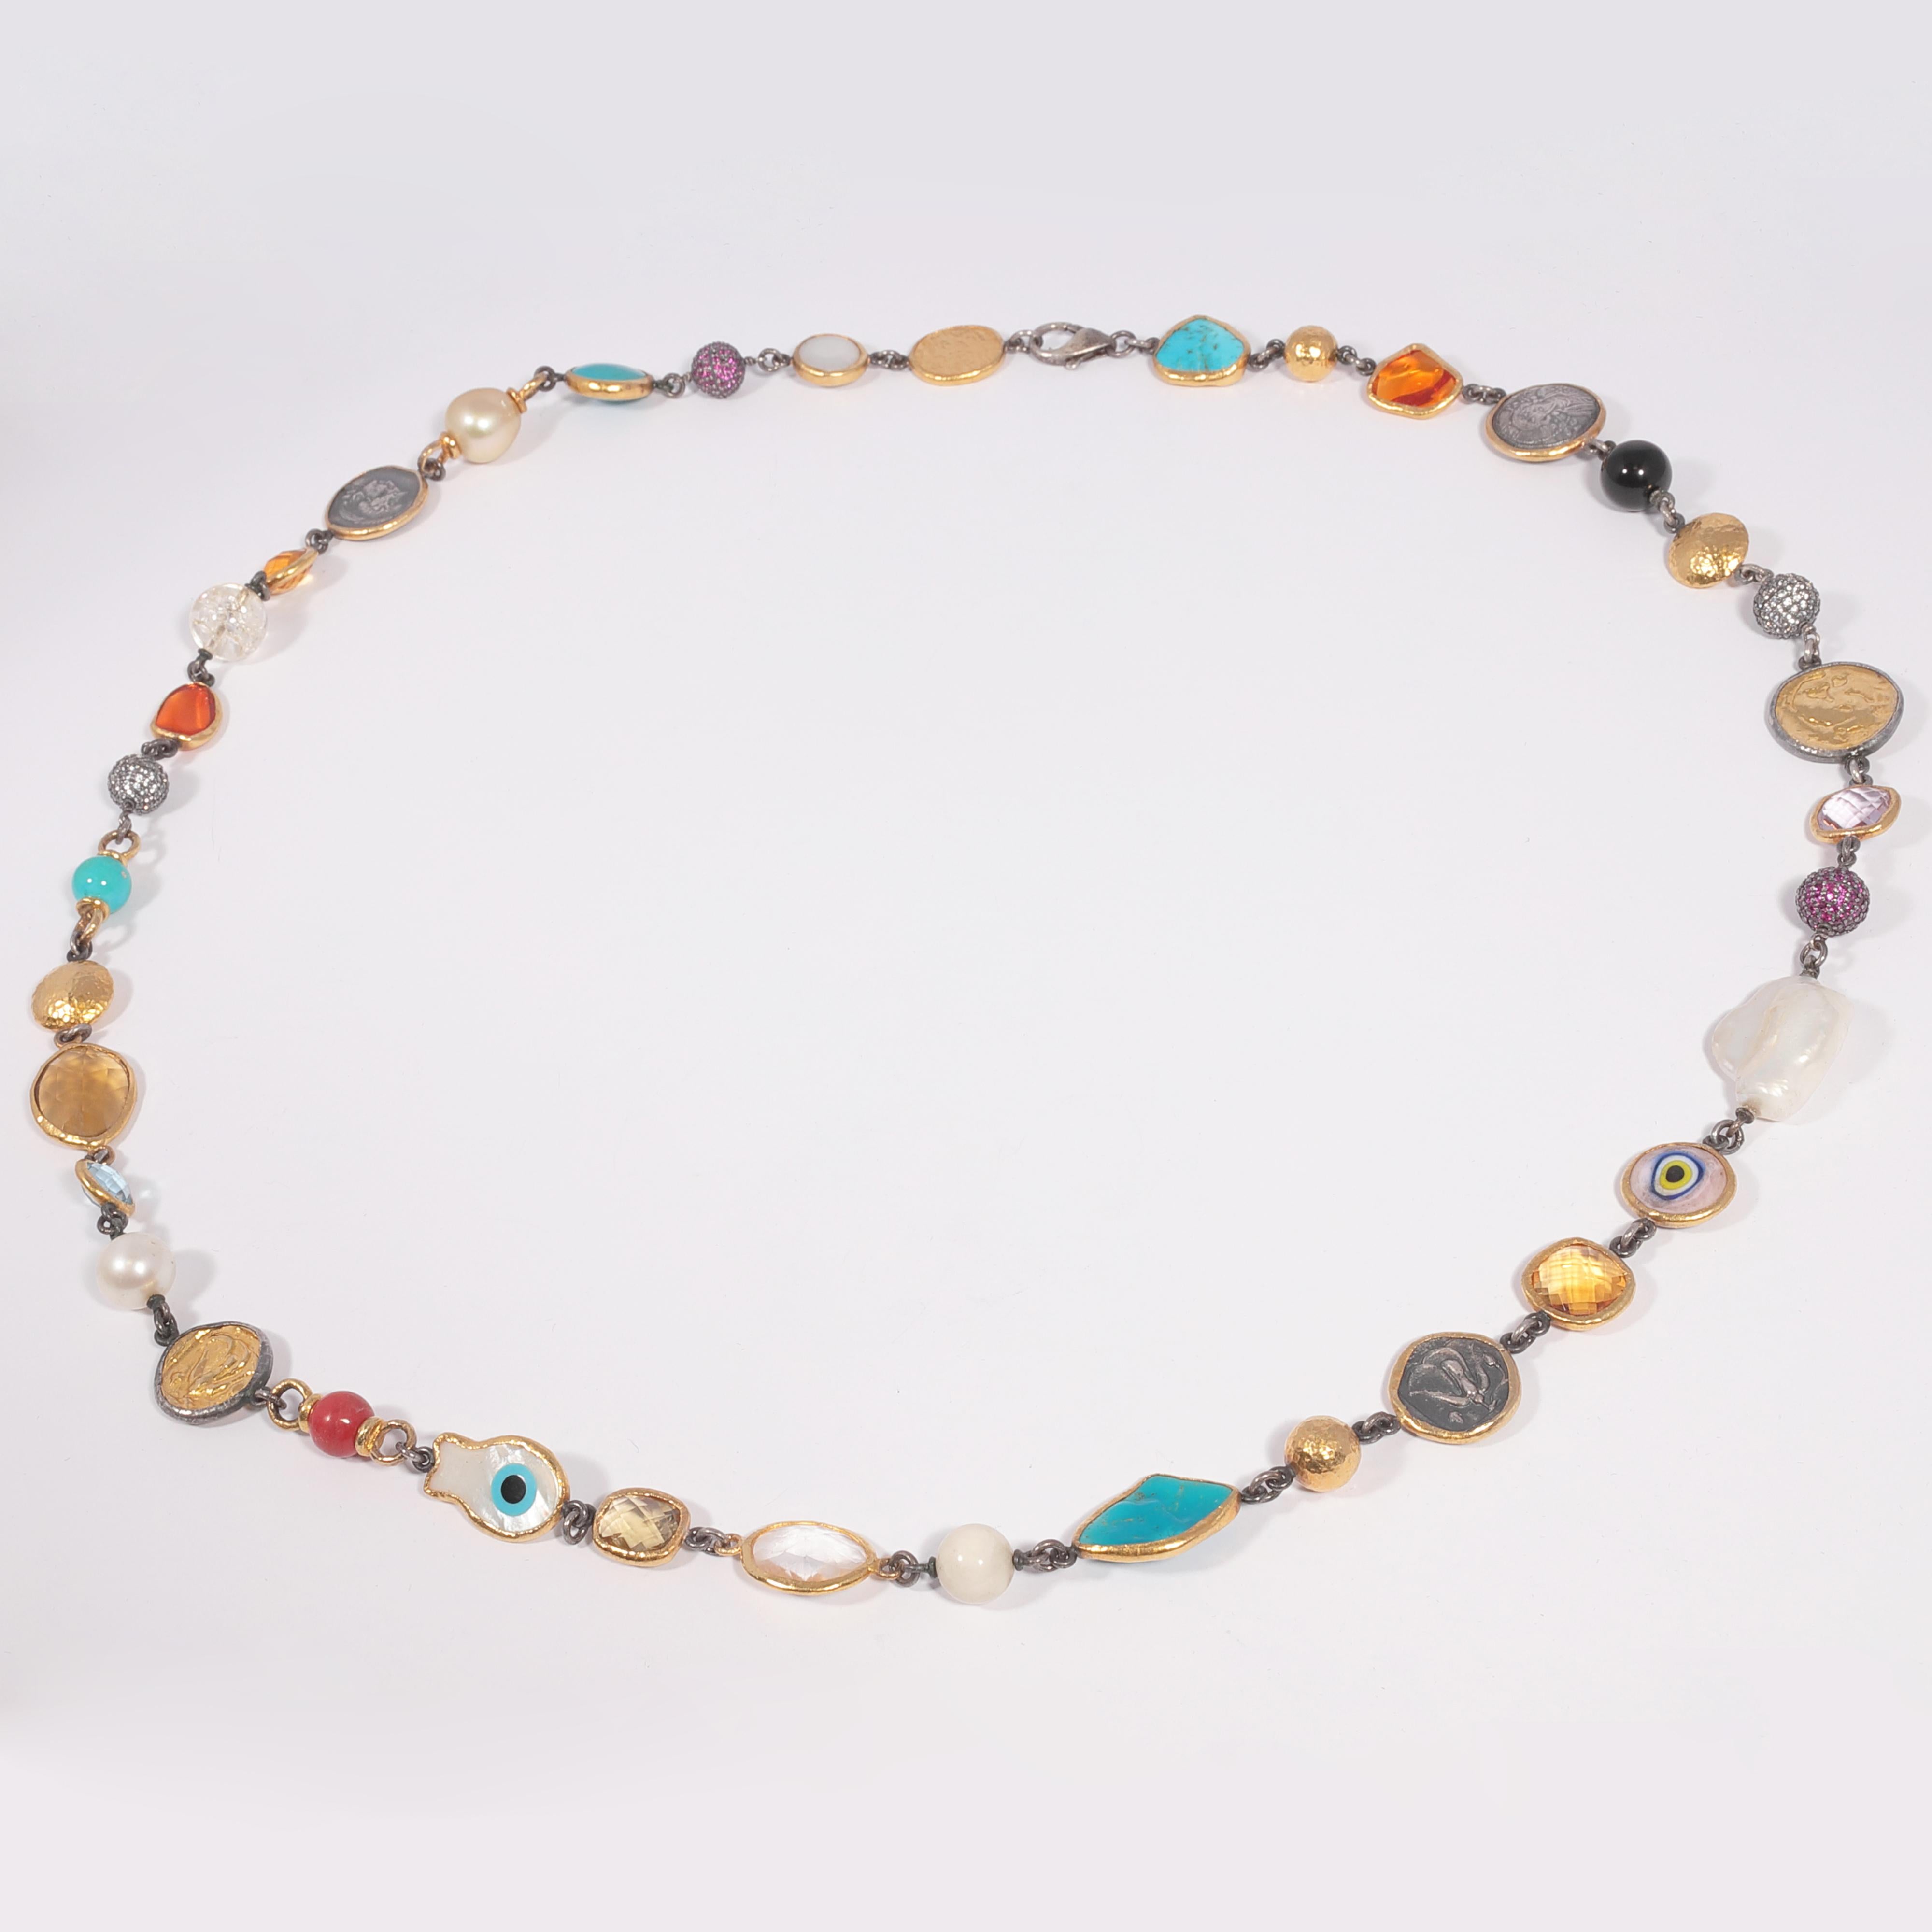 This unique necklace, set in 23.6 karat gold and sterling silver, features a striking collection of coins, turquoise, mother-of-pearl, citrine, topaz, onyx, quartz, fire opal, pink sapphires, white sapphires, and cultured pearls.  The necklace is